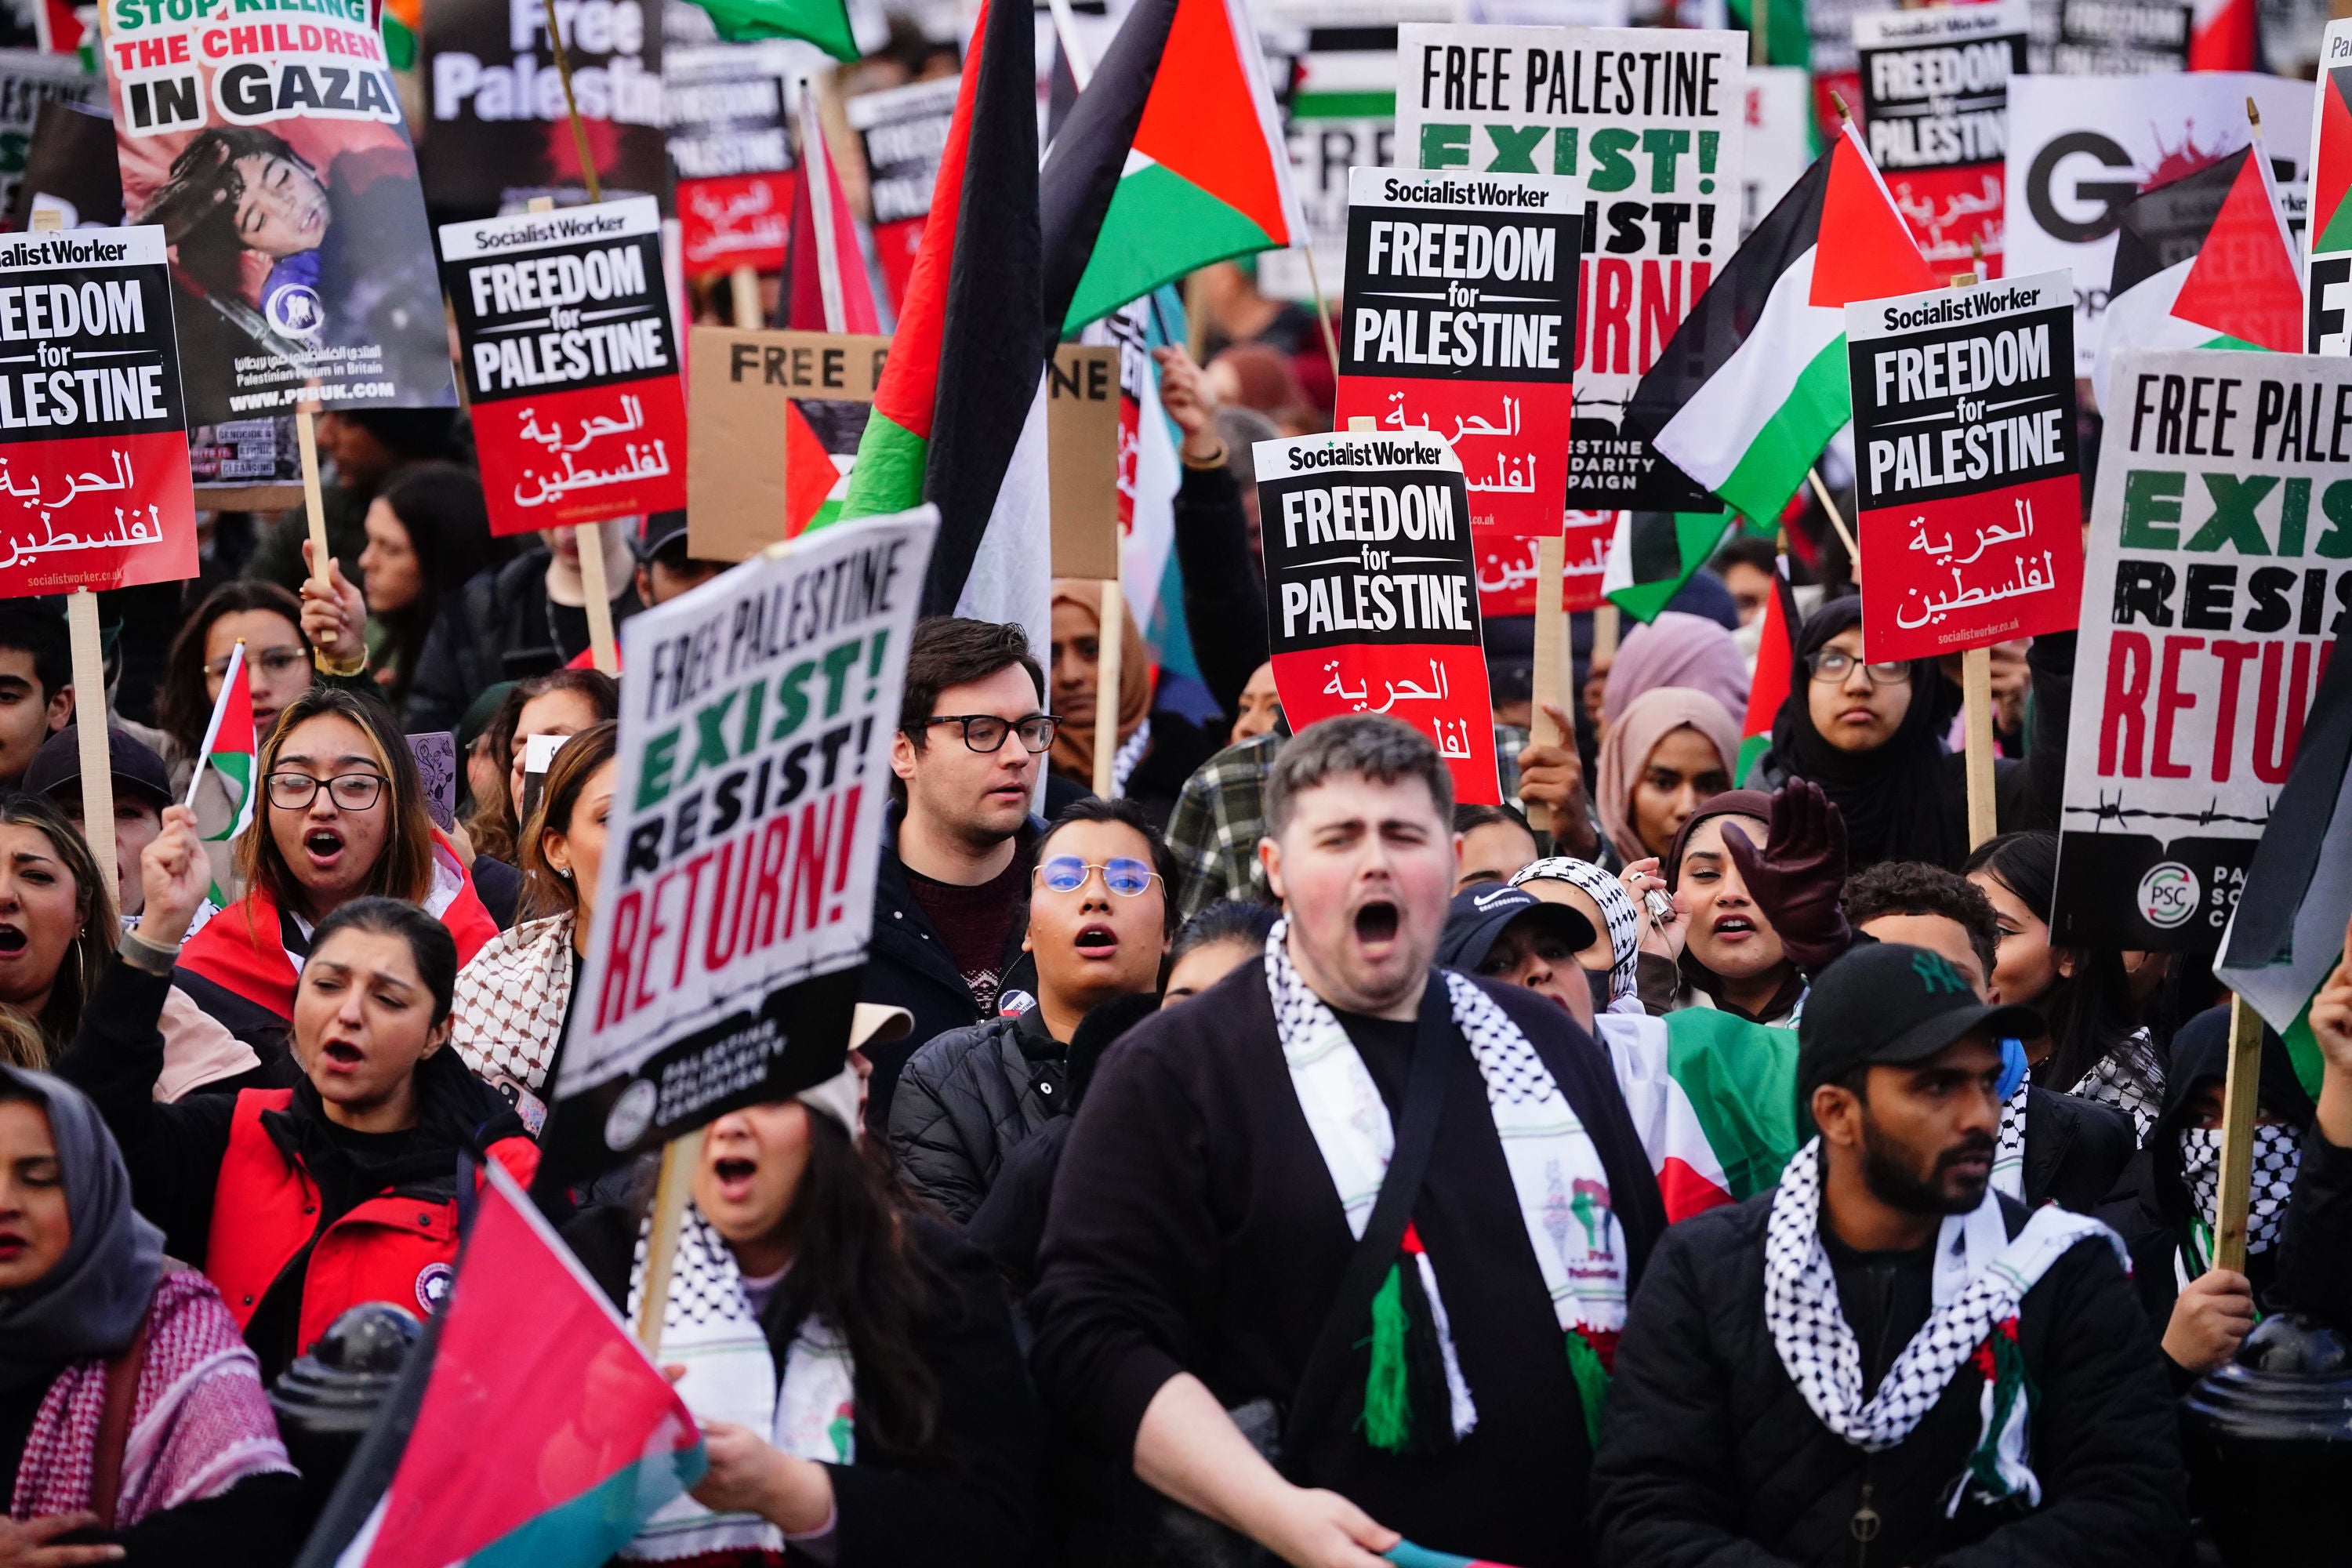 People at a rally in Trafalgar Square, London, last weekend during Stop the War coalition's call for a Palestine ceasefire